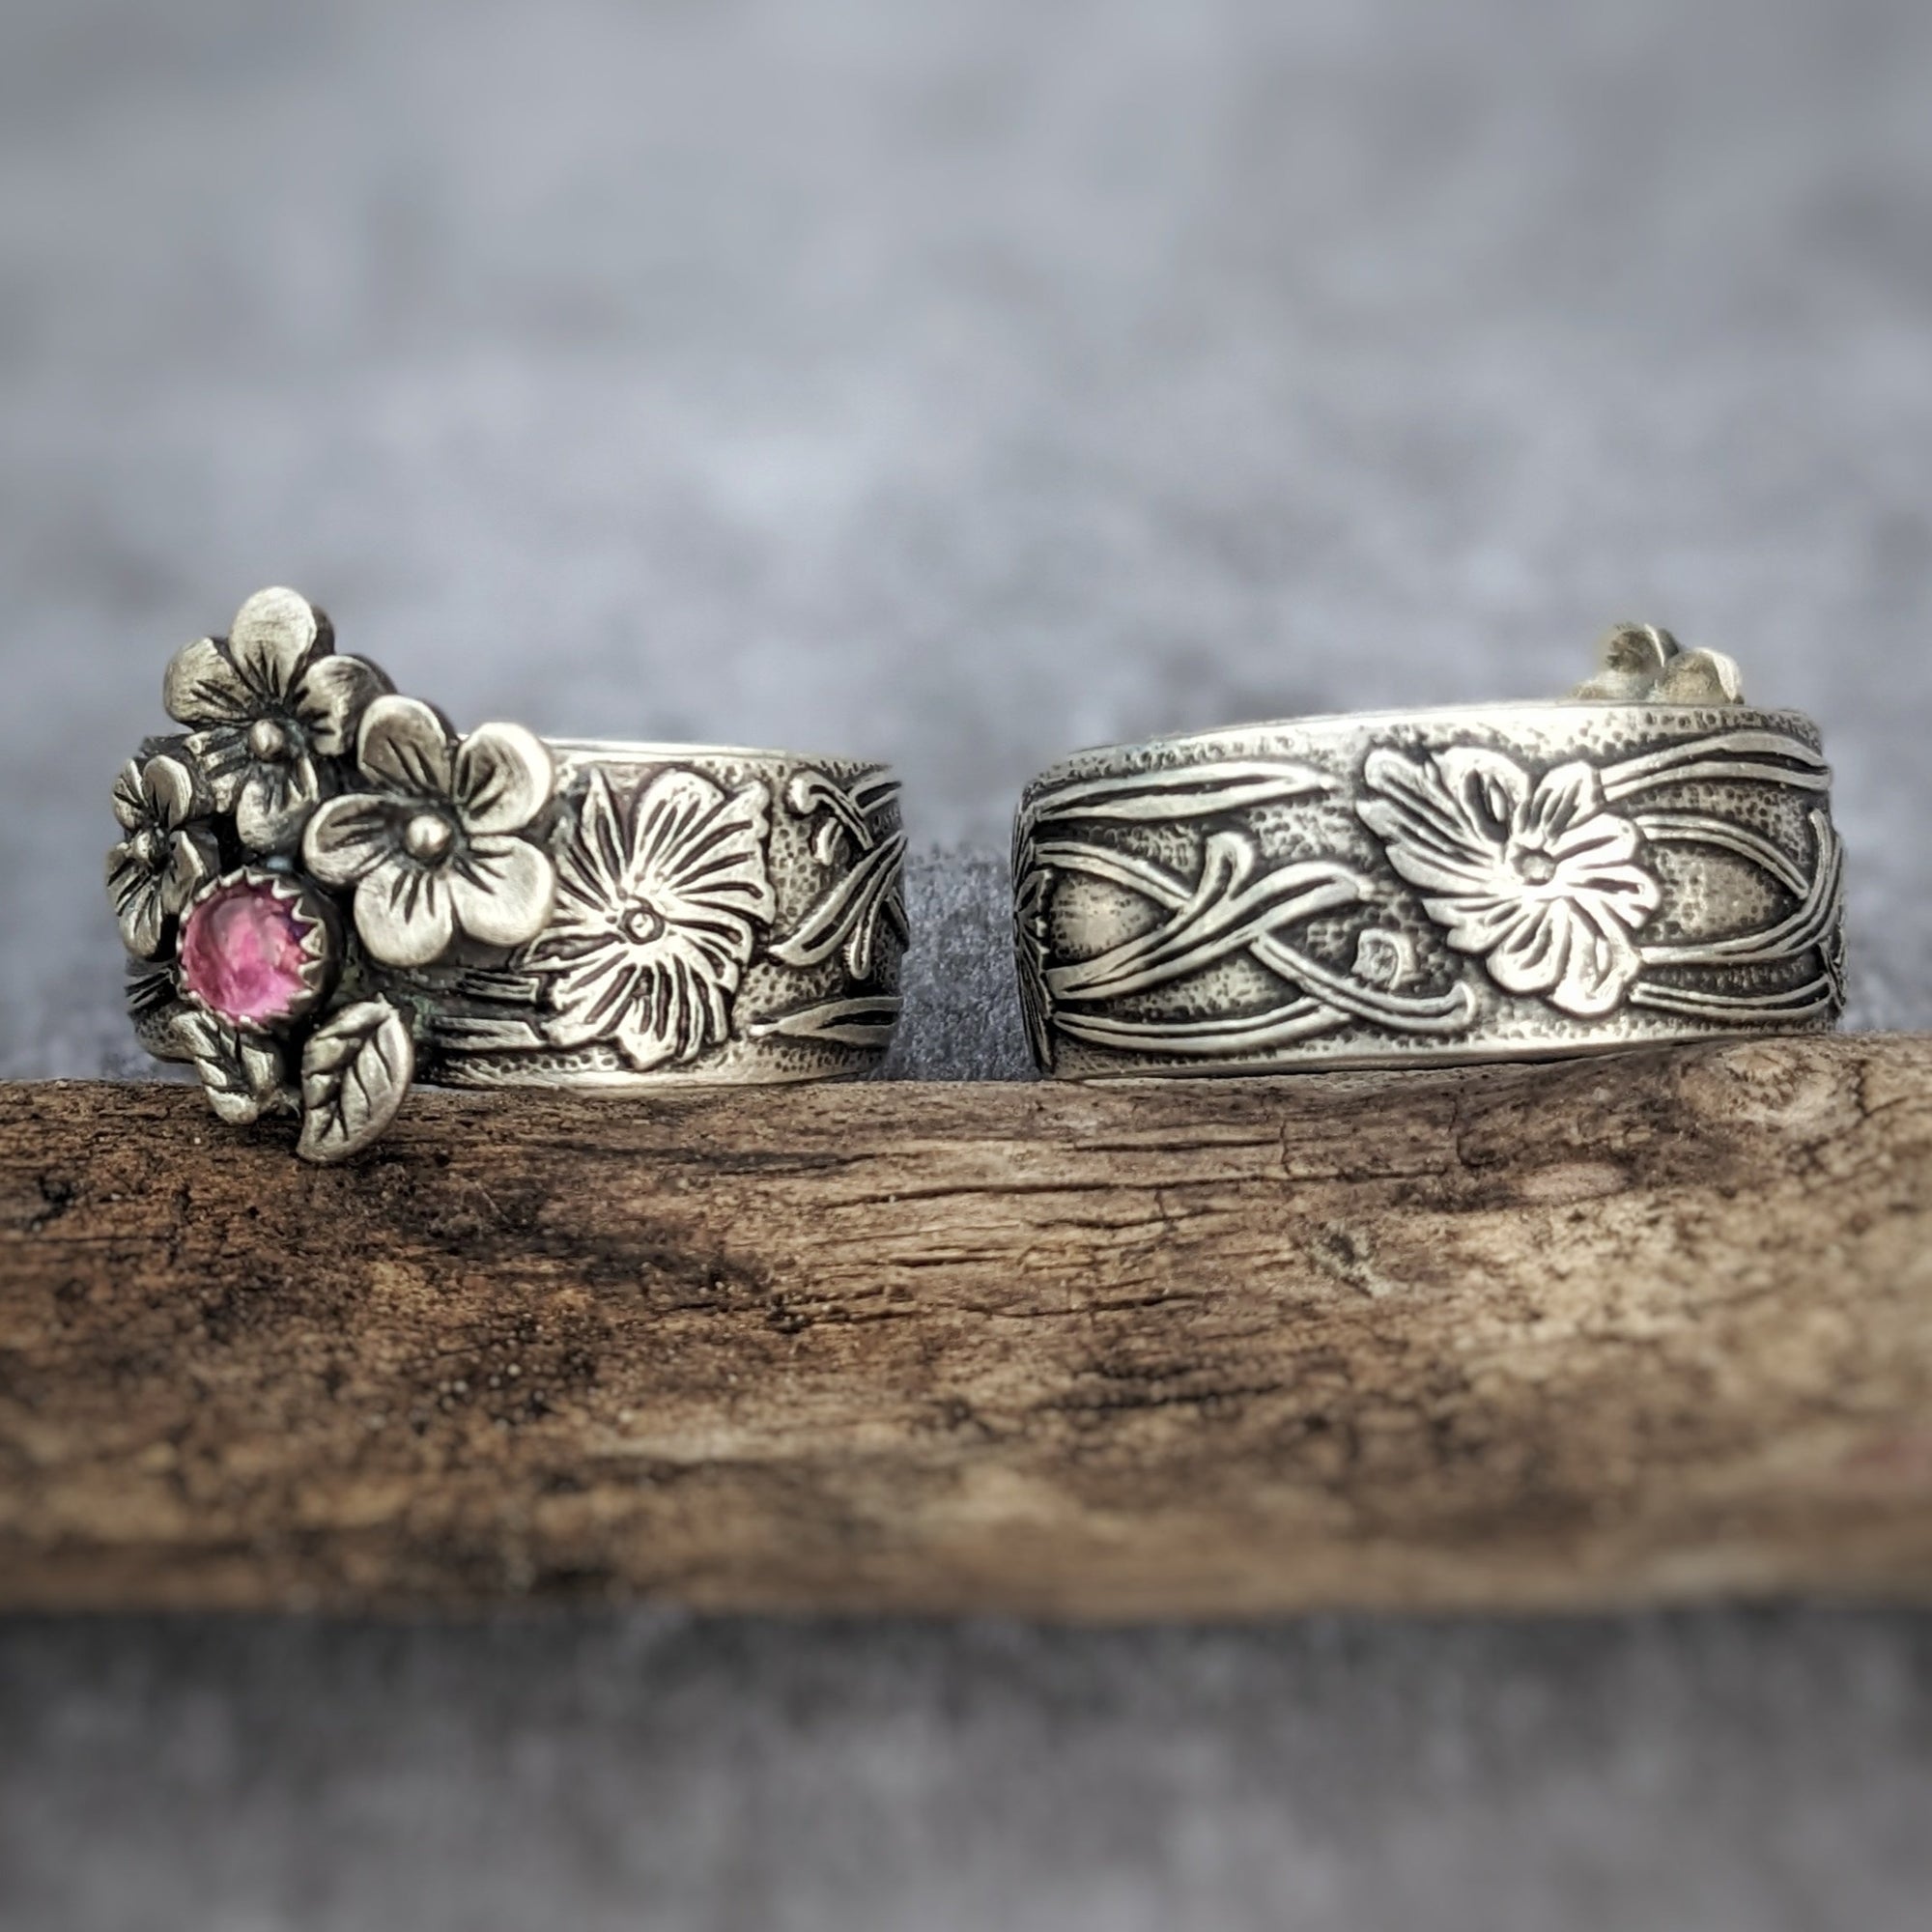 Floral Sterling Silver Ring Band - 7 | Sterling silver rings bands, Silver band  ring, Sterling silver rings